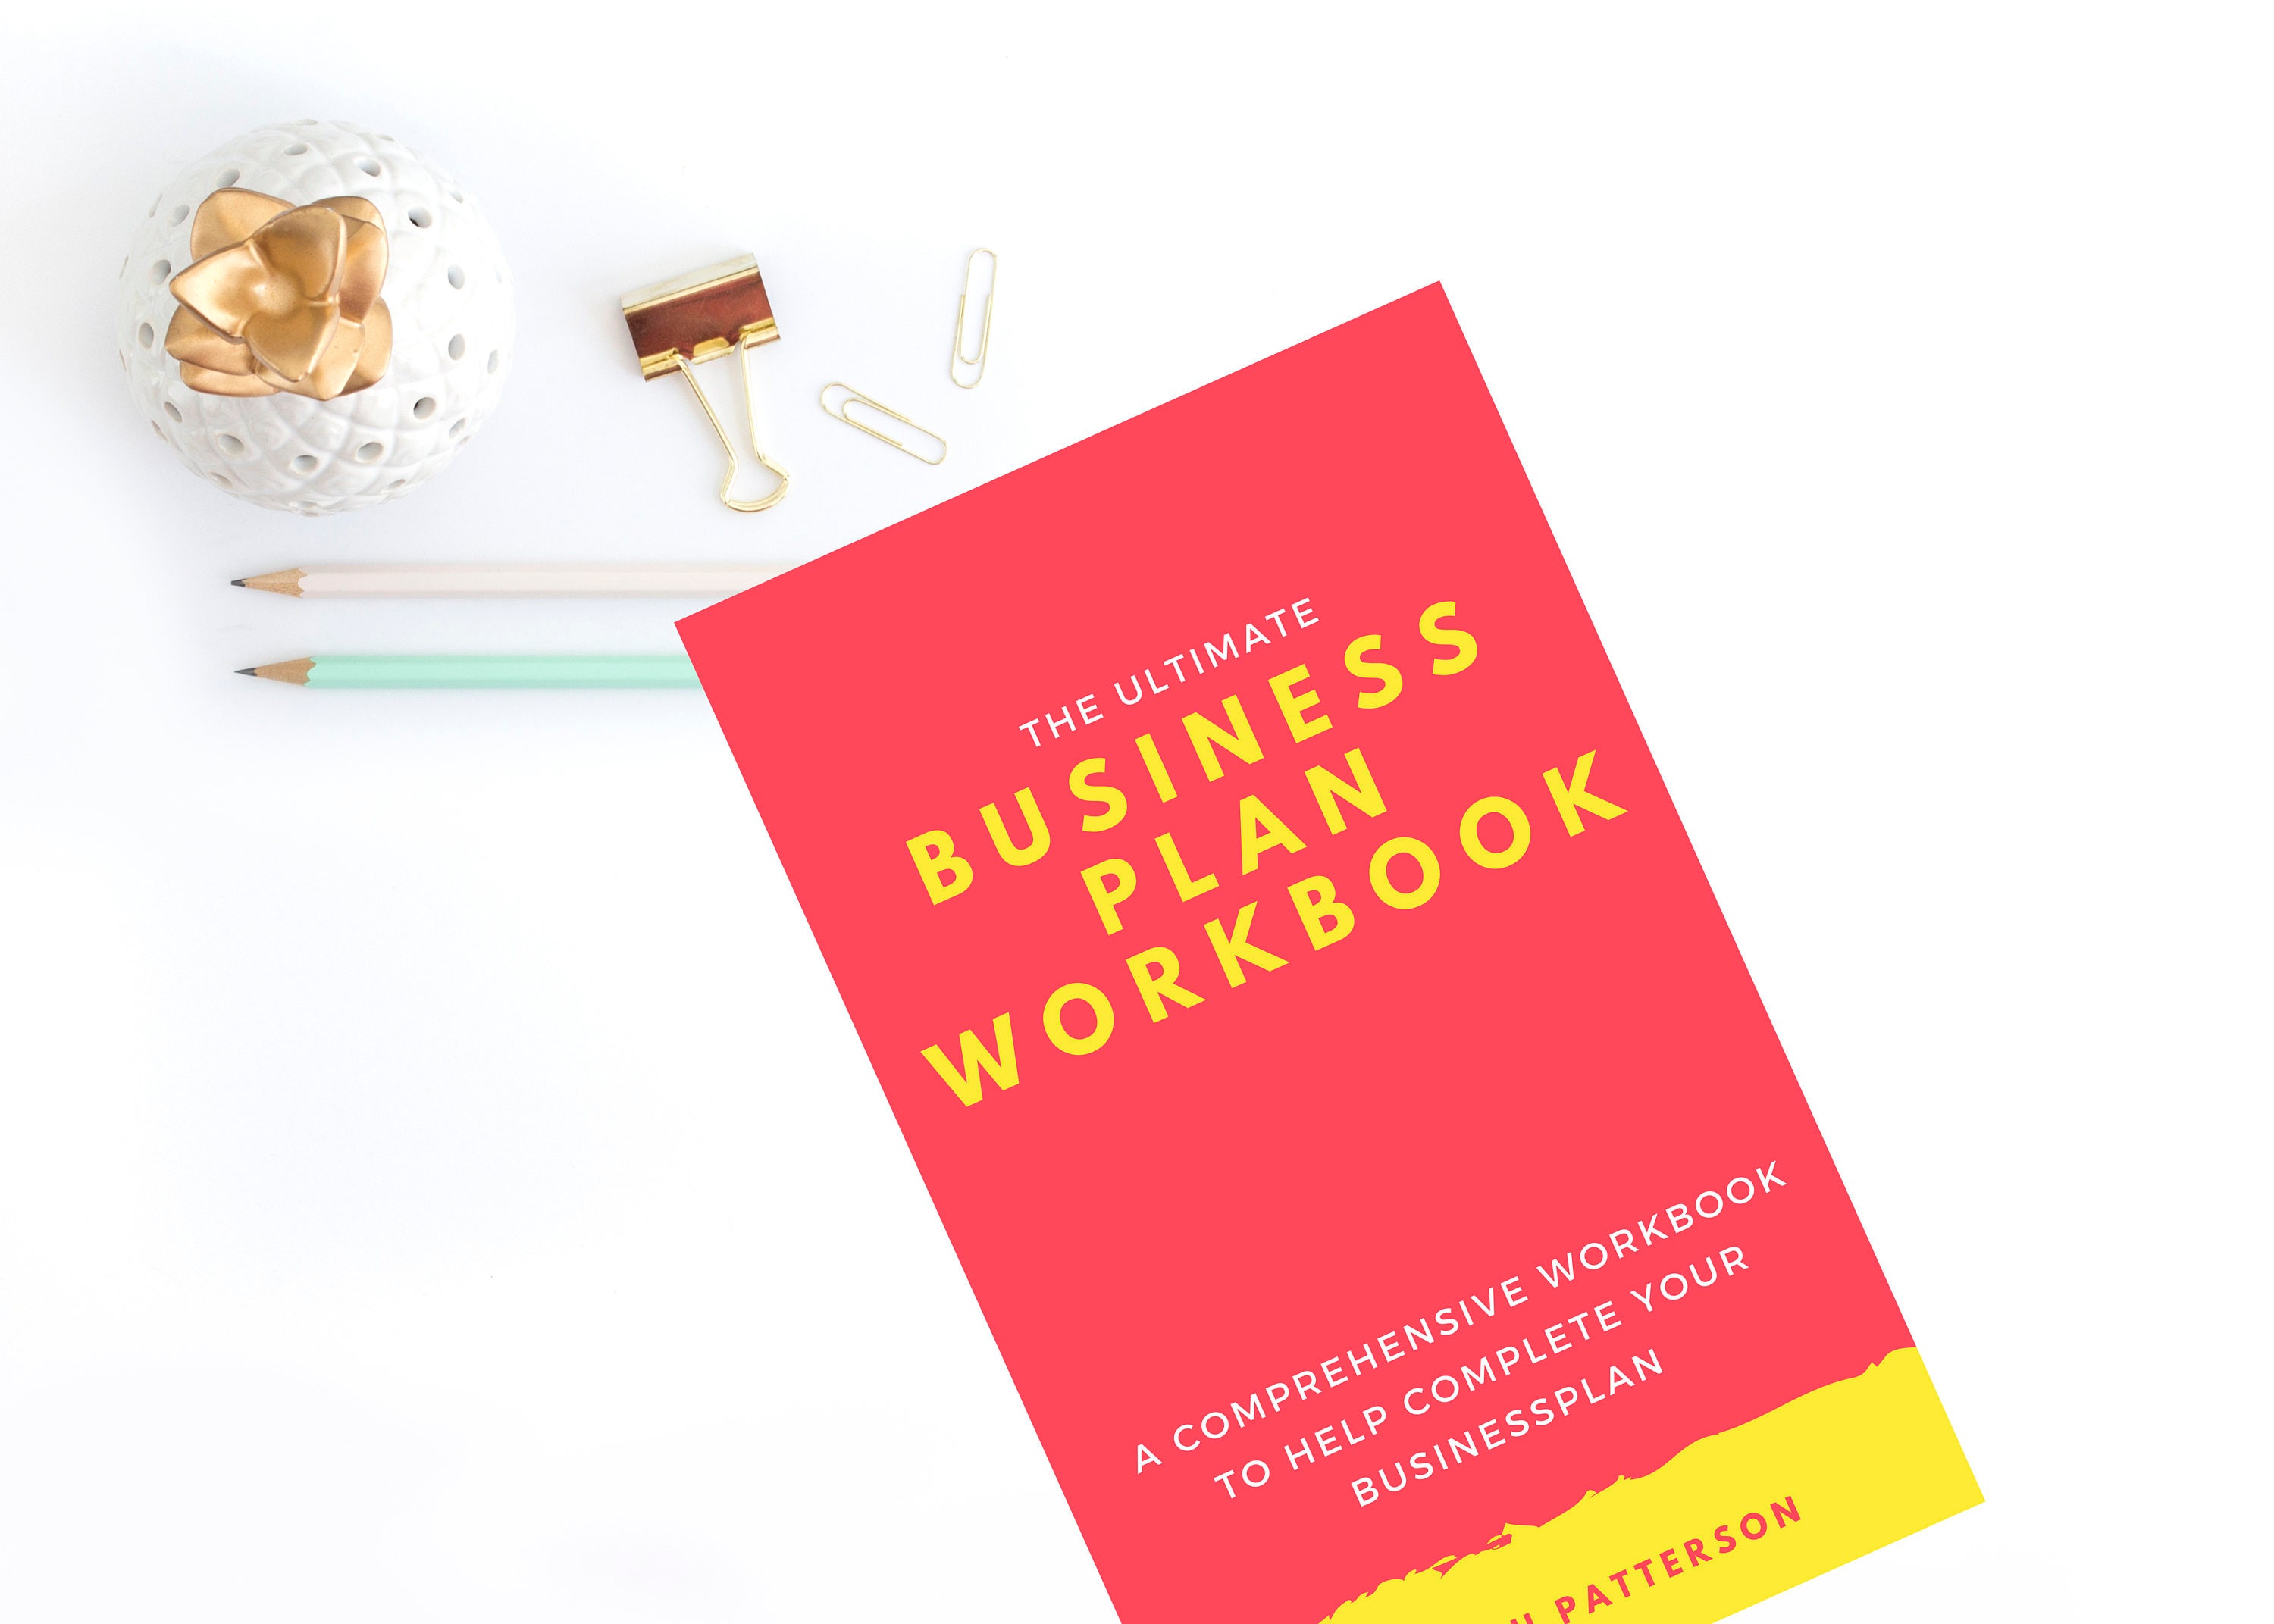 books on business plans